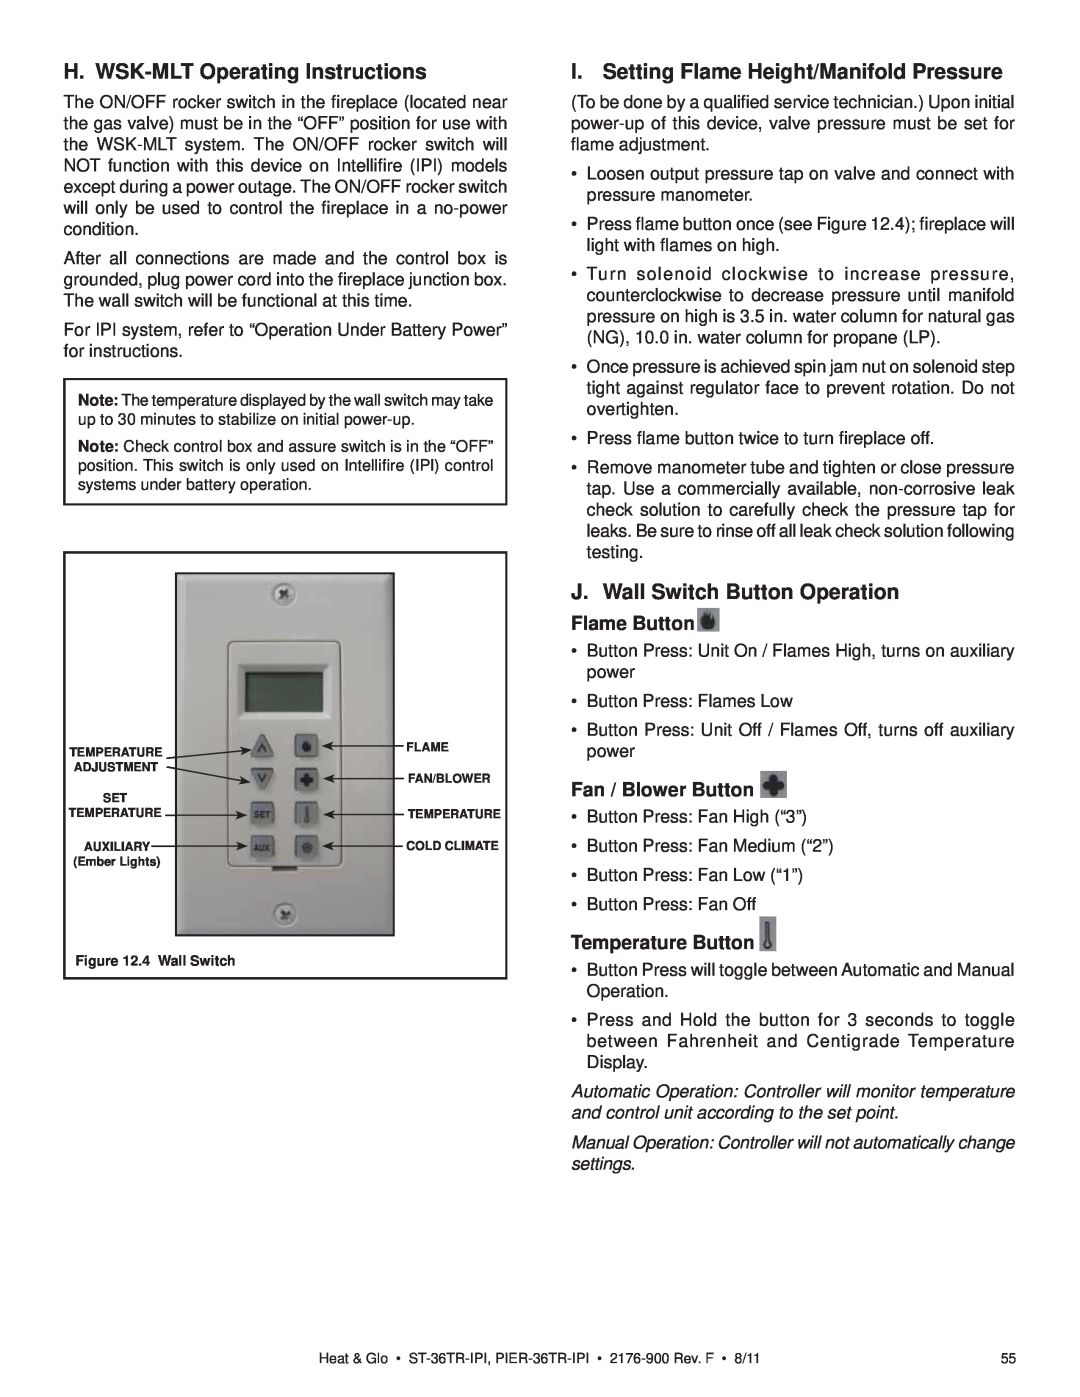 Heat & Glo LifeStyle ST-36TR-IPI owner manual H. WSK-MLT Operating Instructions, I. Setting Flame Height/Manifold Pressure 